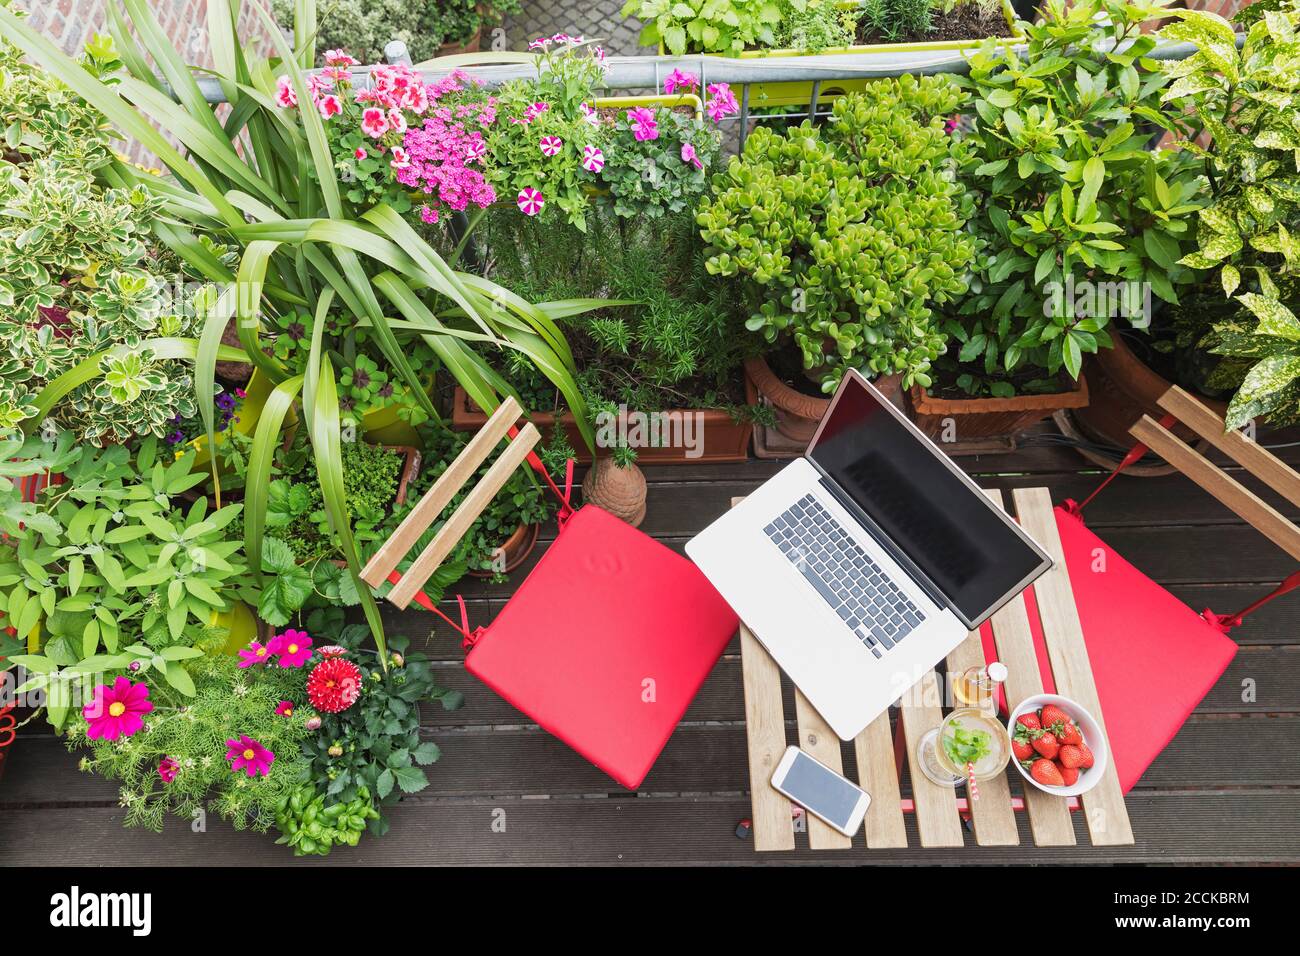 Laptop lying on balcony table surrounded by various summer herbs and flowers Stock Photo